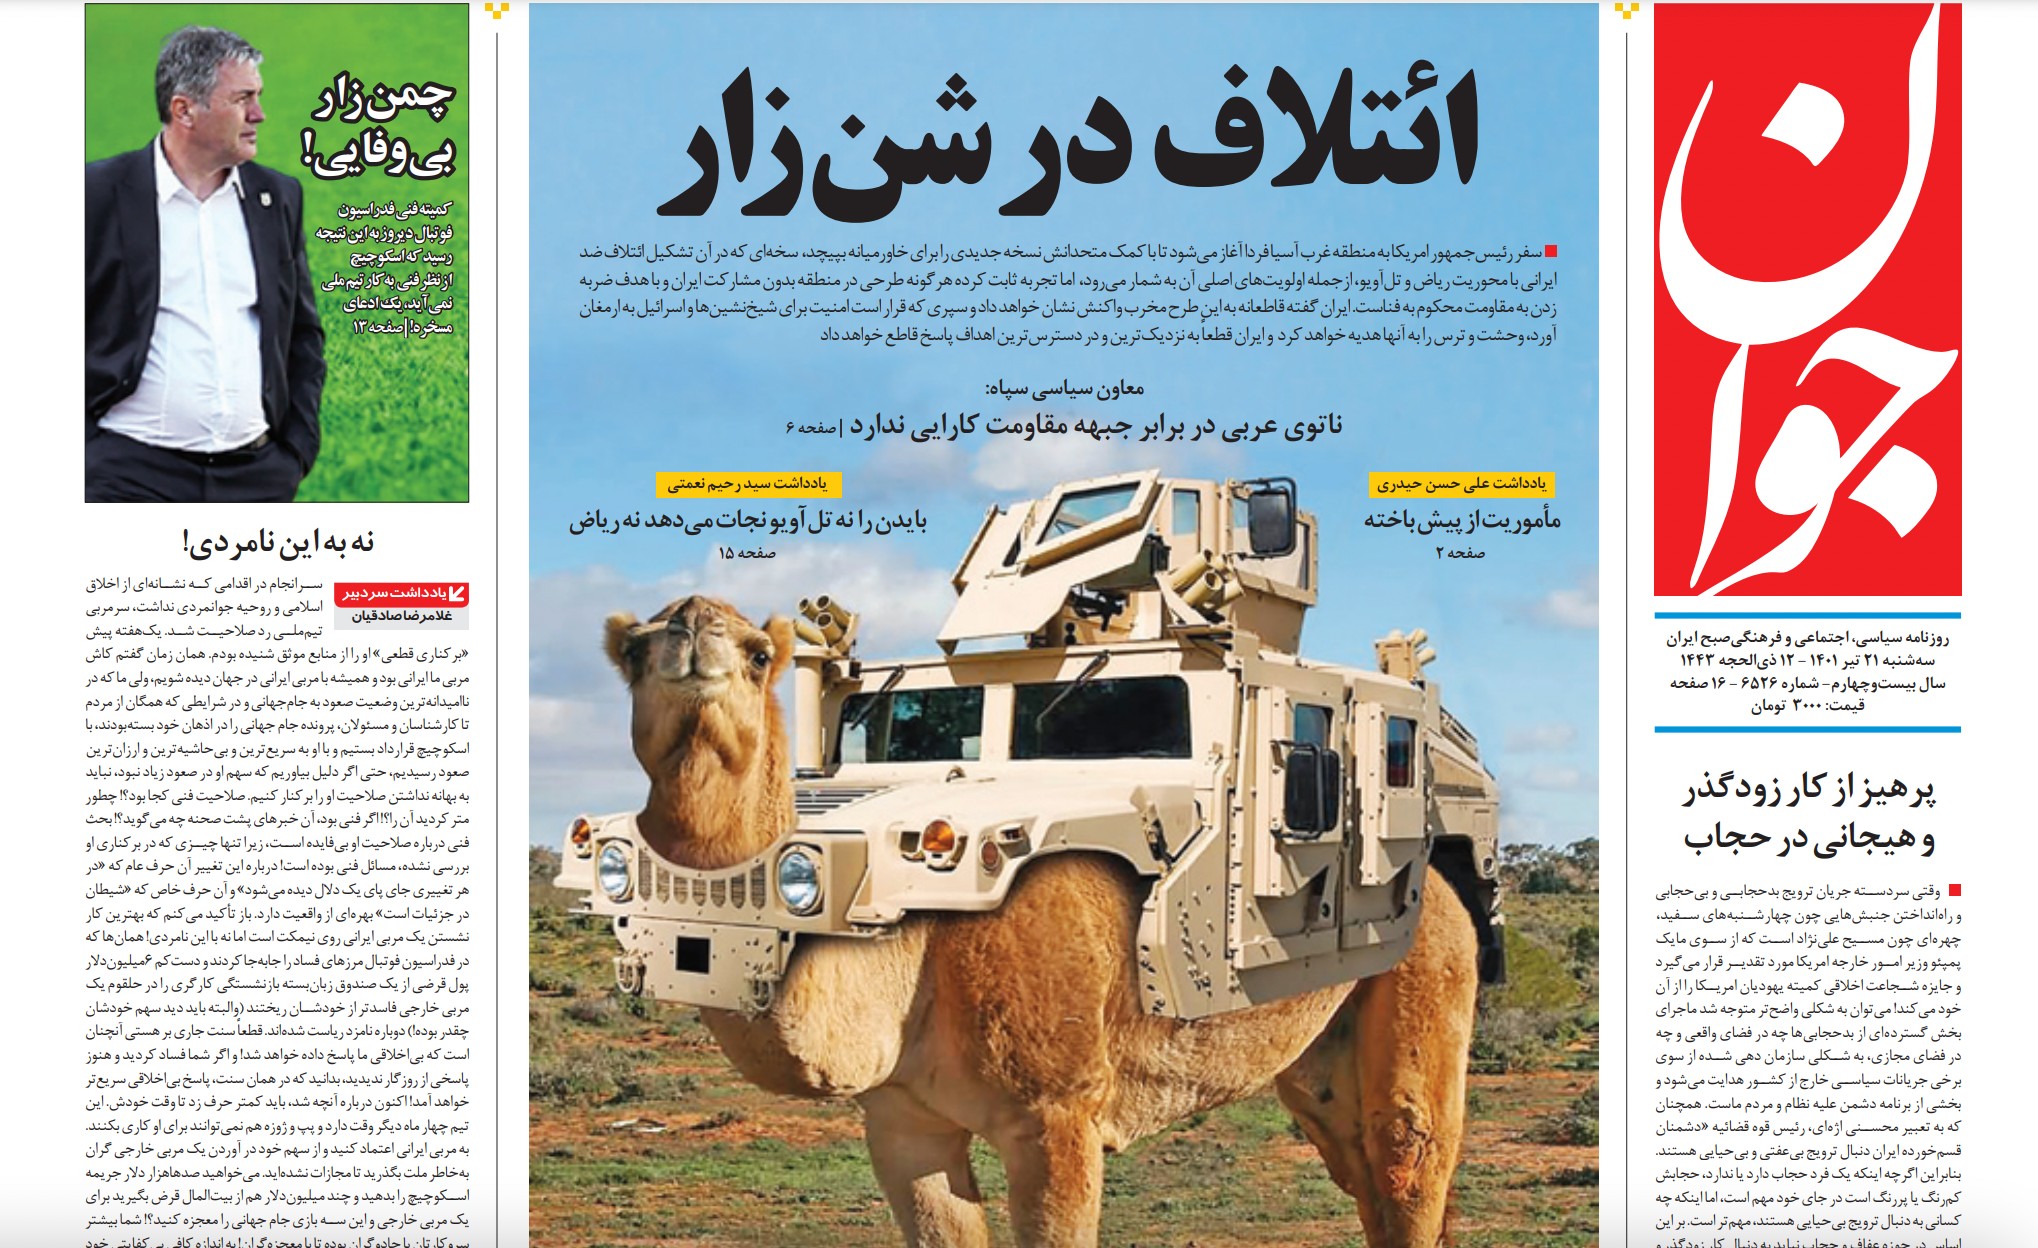 Front page of the Javan newspaper criticising a Middle Eastern Nato